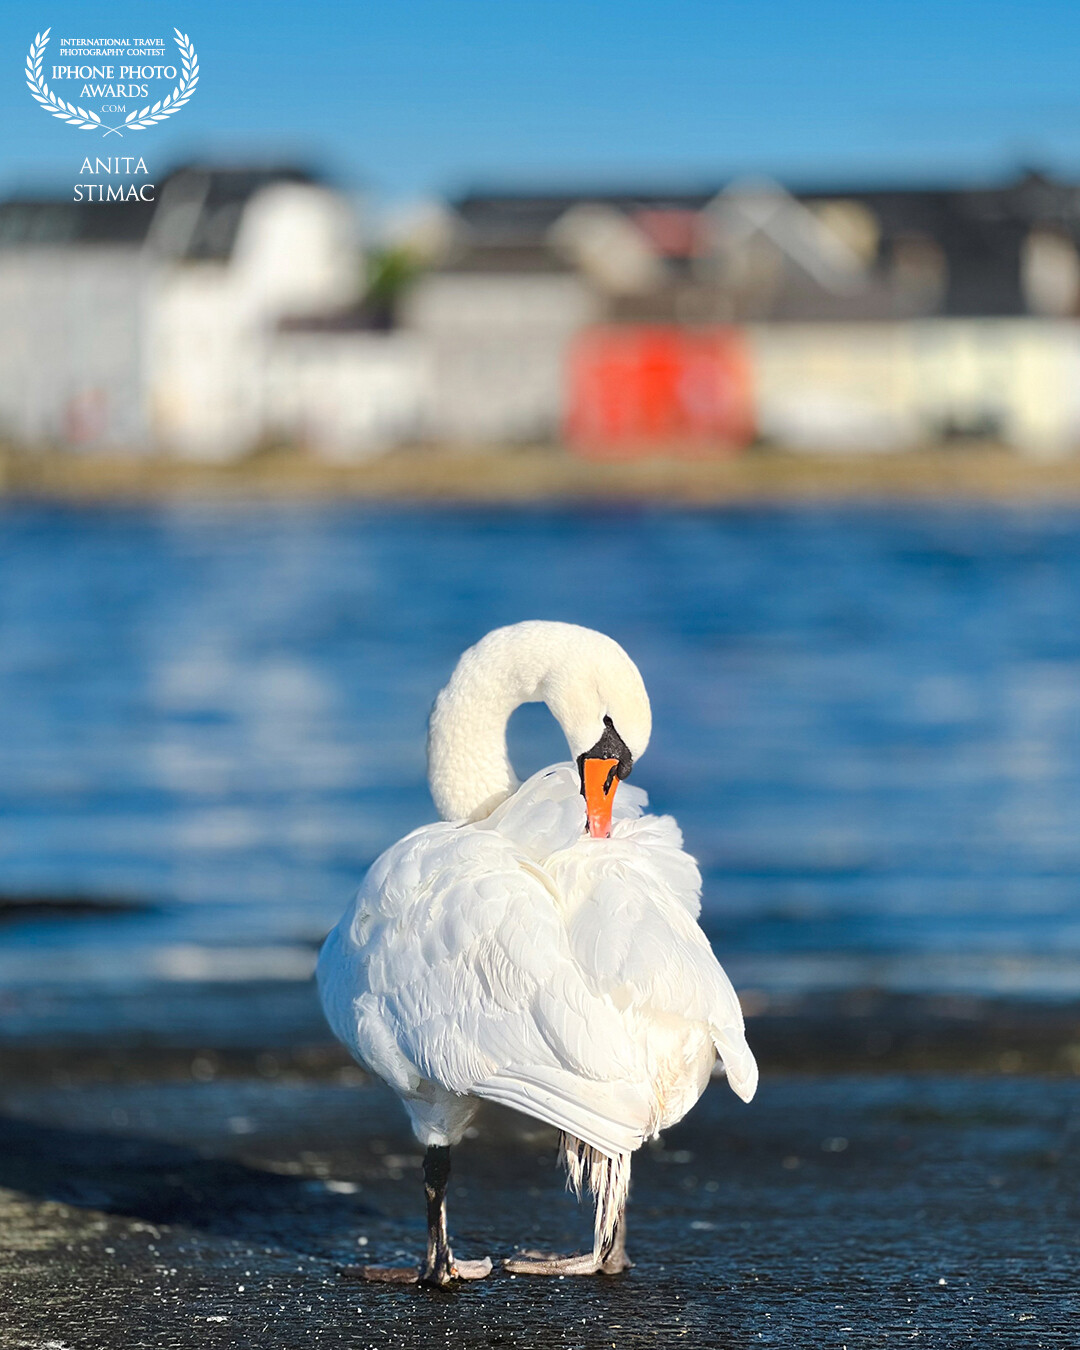 It’s hard not to fall in love with Galway when you’re greeted with scenes like this every day. Claddagh is famous for its large population of beautiful swans.